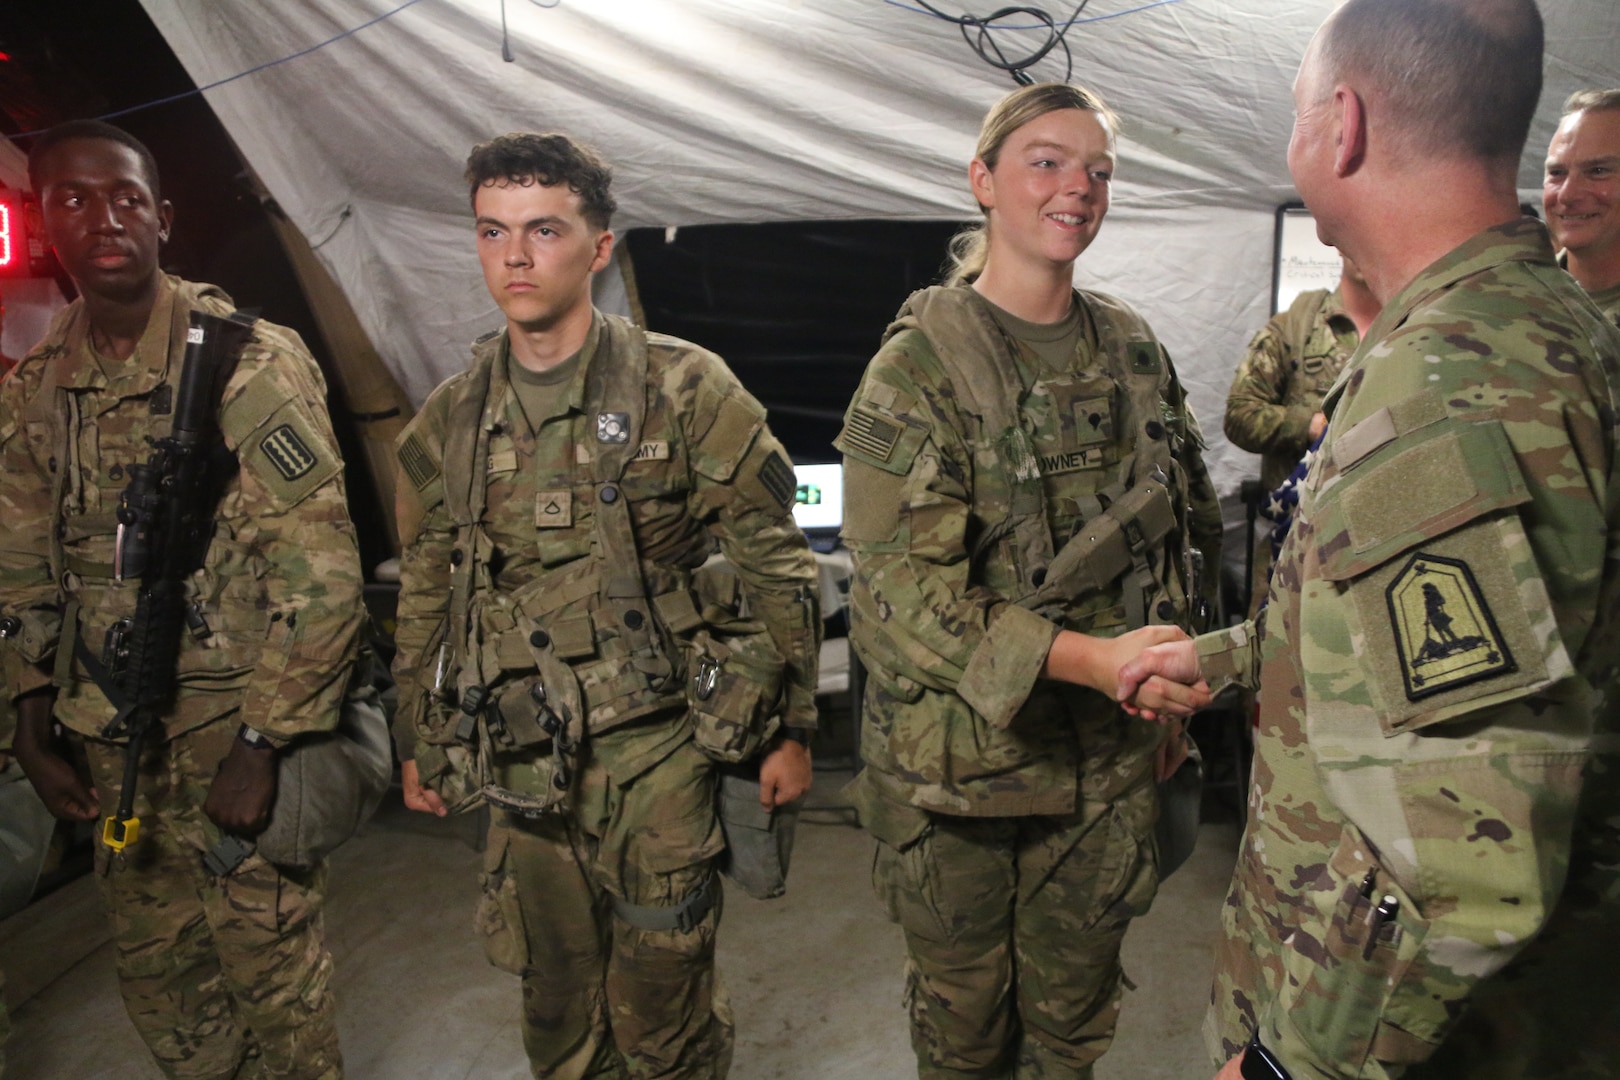 529th CSSB Soldiers endure heat, gain valuable training during JRTC rotation